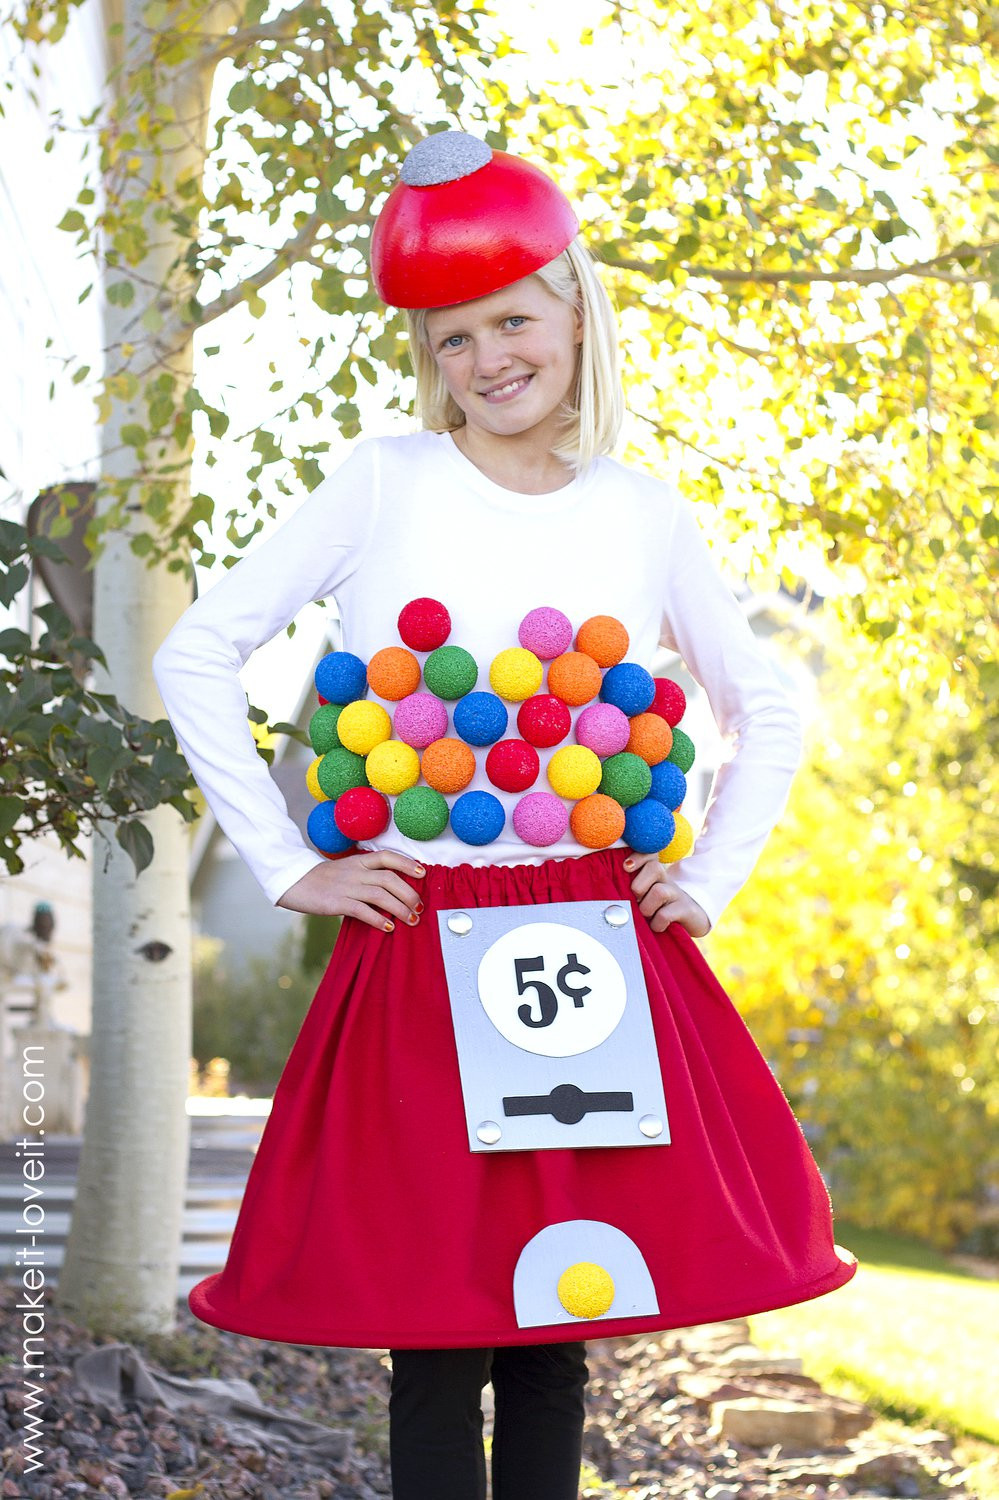 Best DIY Halloween Costumes
 The 15 Best DIY Halloween Costumes for Adults